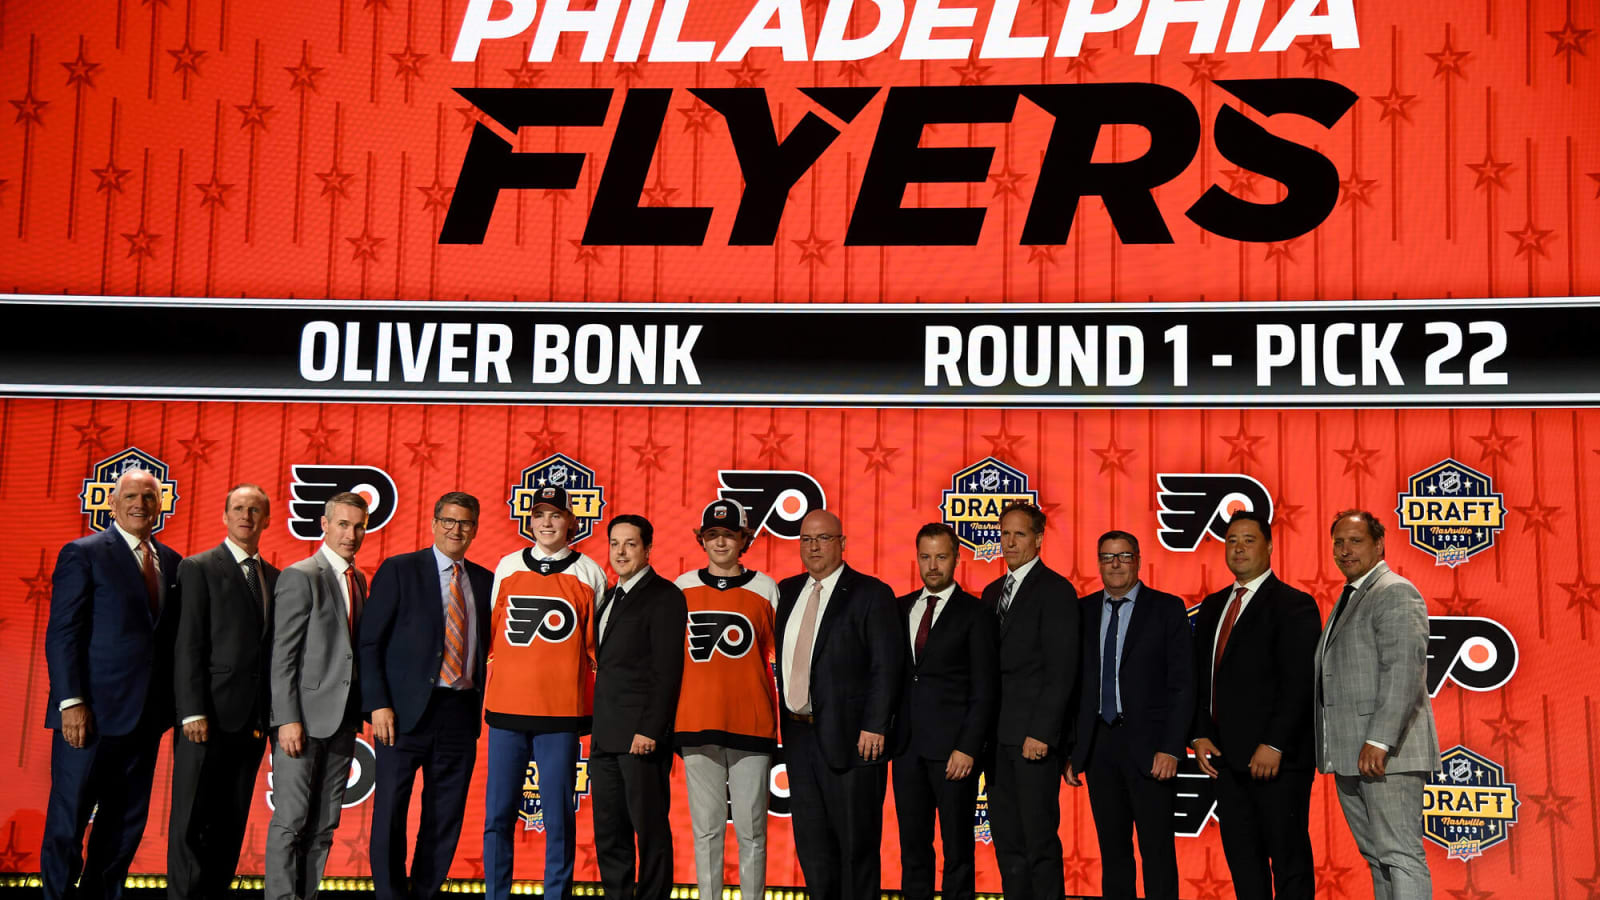 Flyers sign Bonk to an entry-level contract